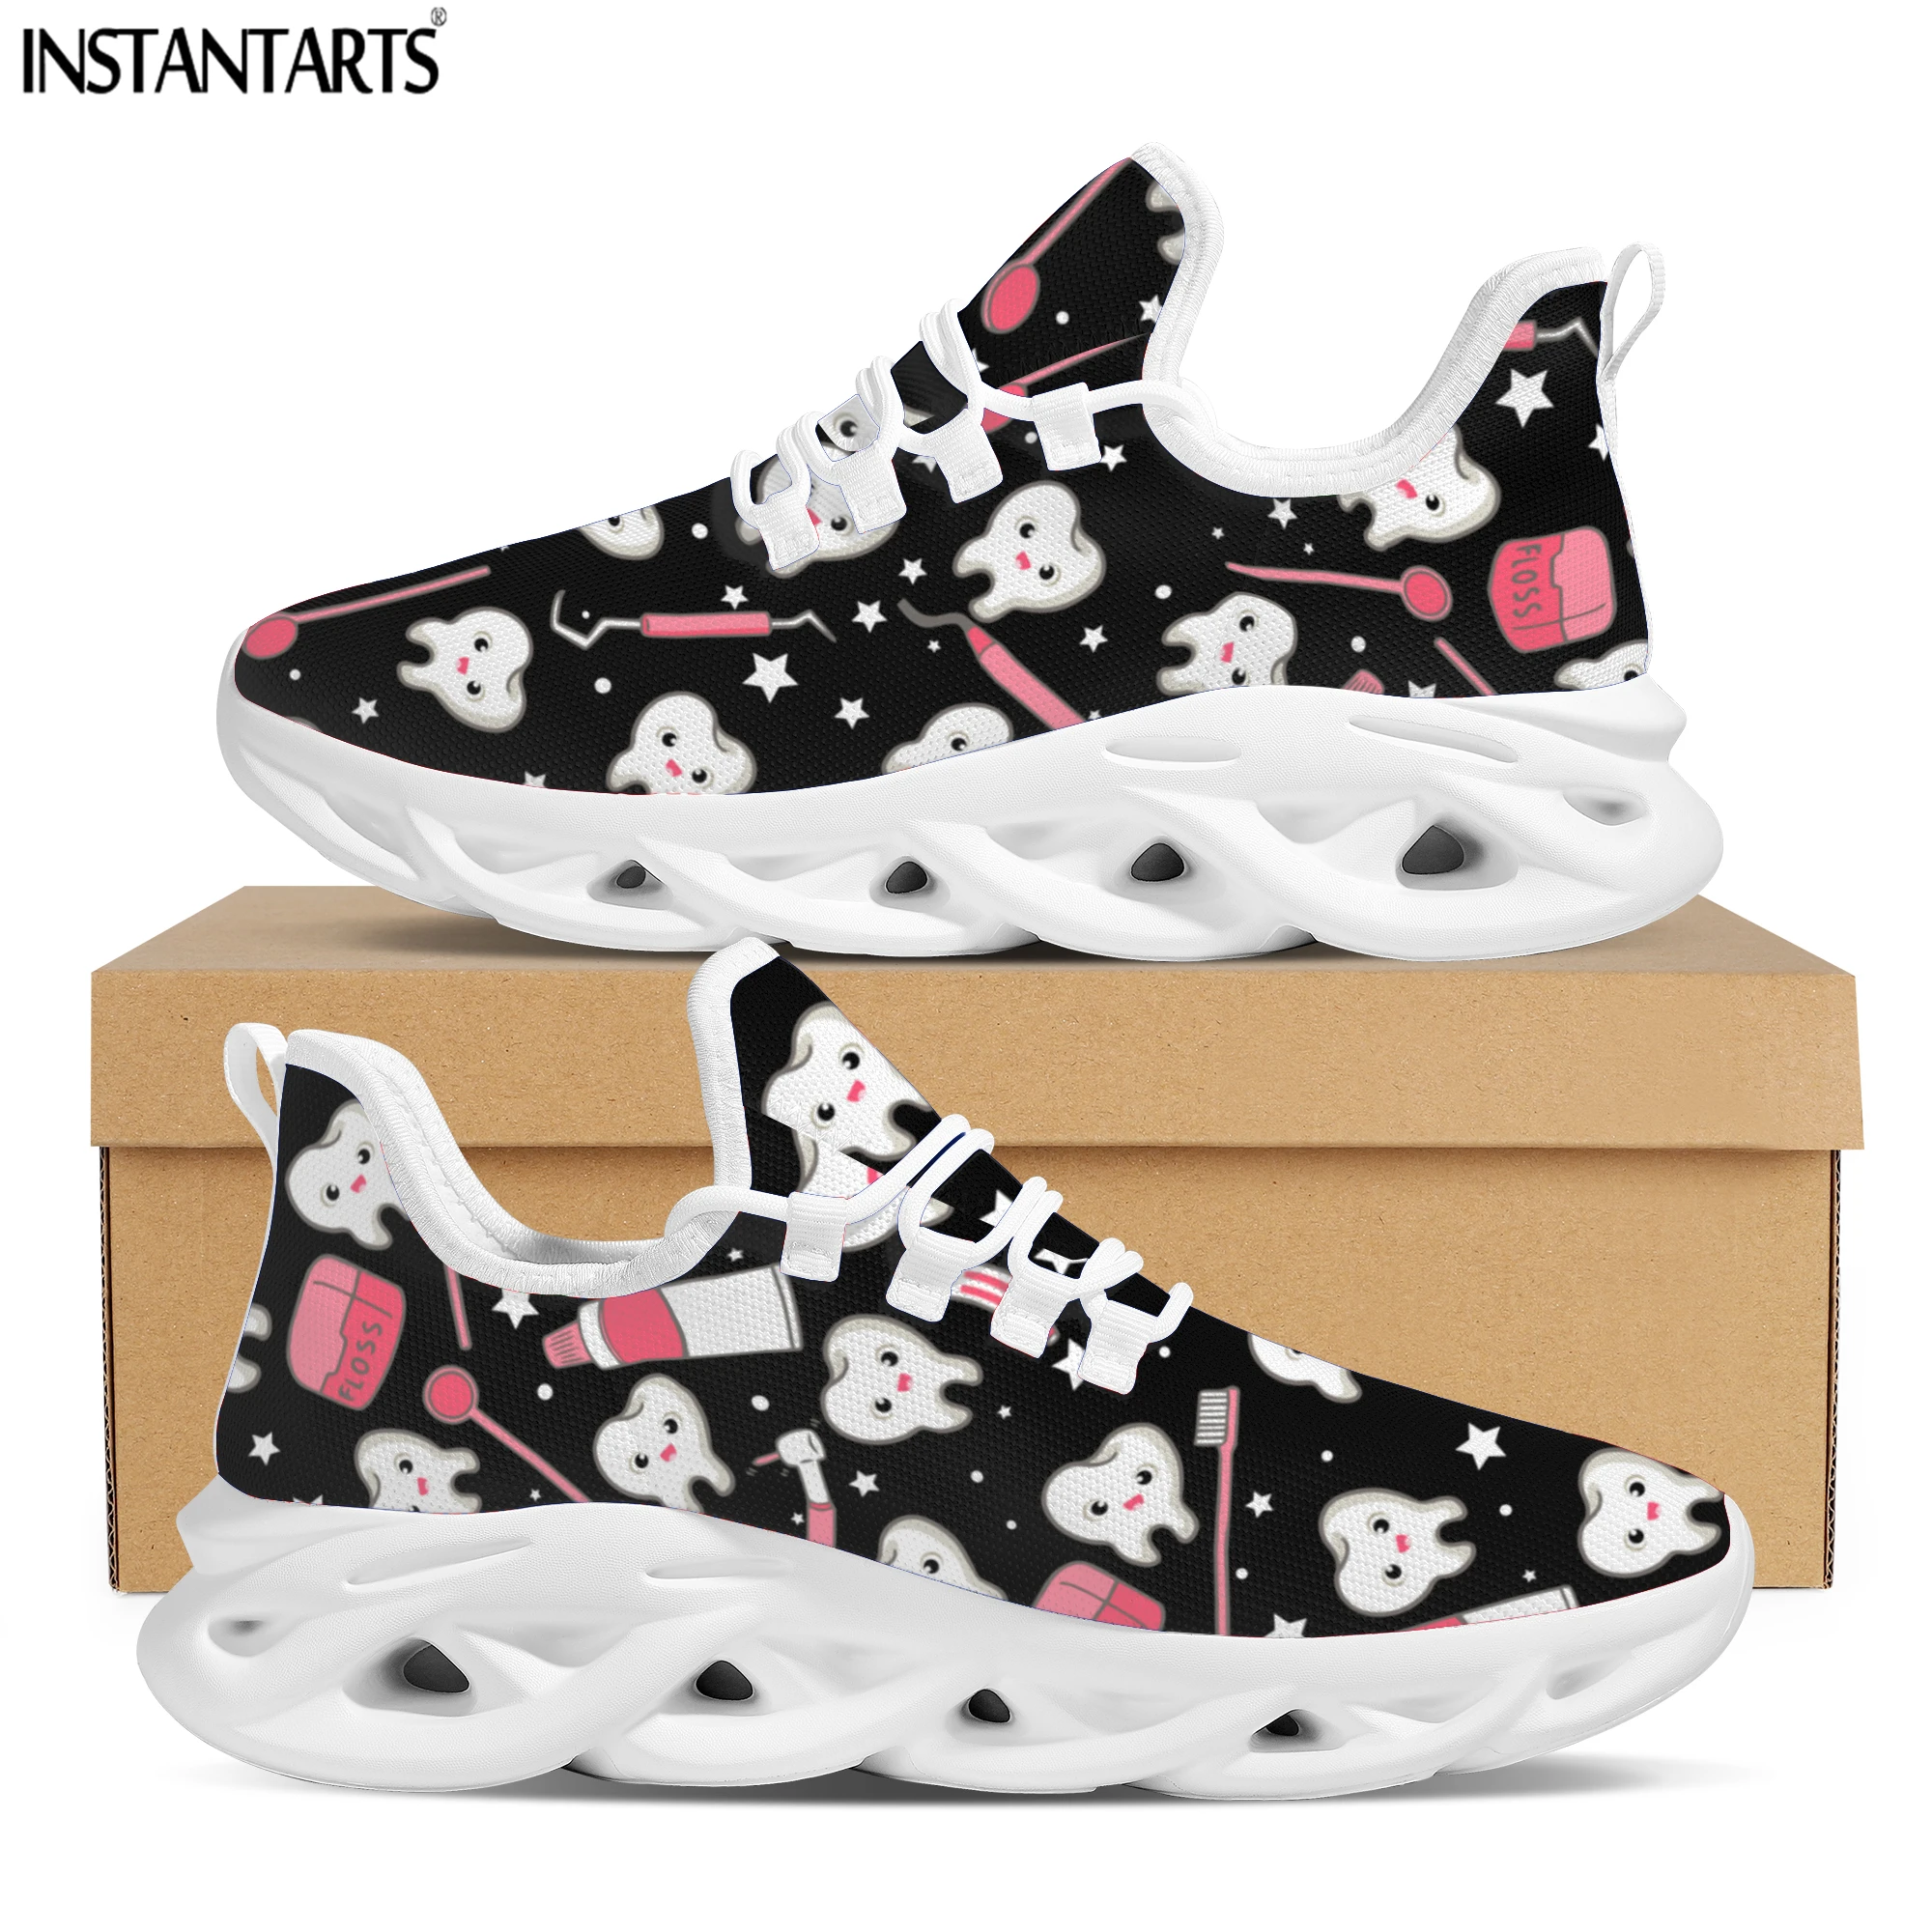 

INSTANTARTS Funny Dentist Cartoon Tooth Pattern Mesh Swing Sneakers for Ladies Breathable Lace up Women Platform Shoes Zapatos